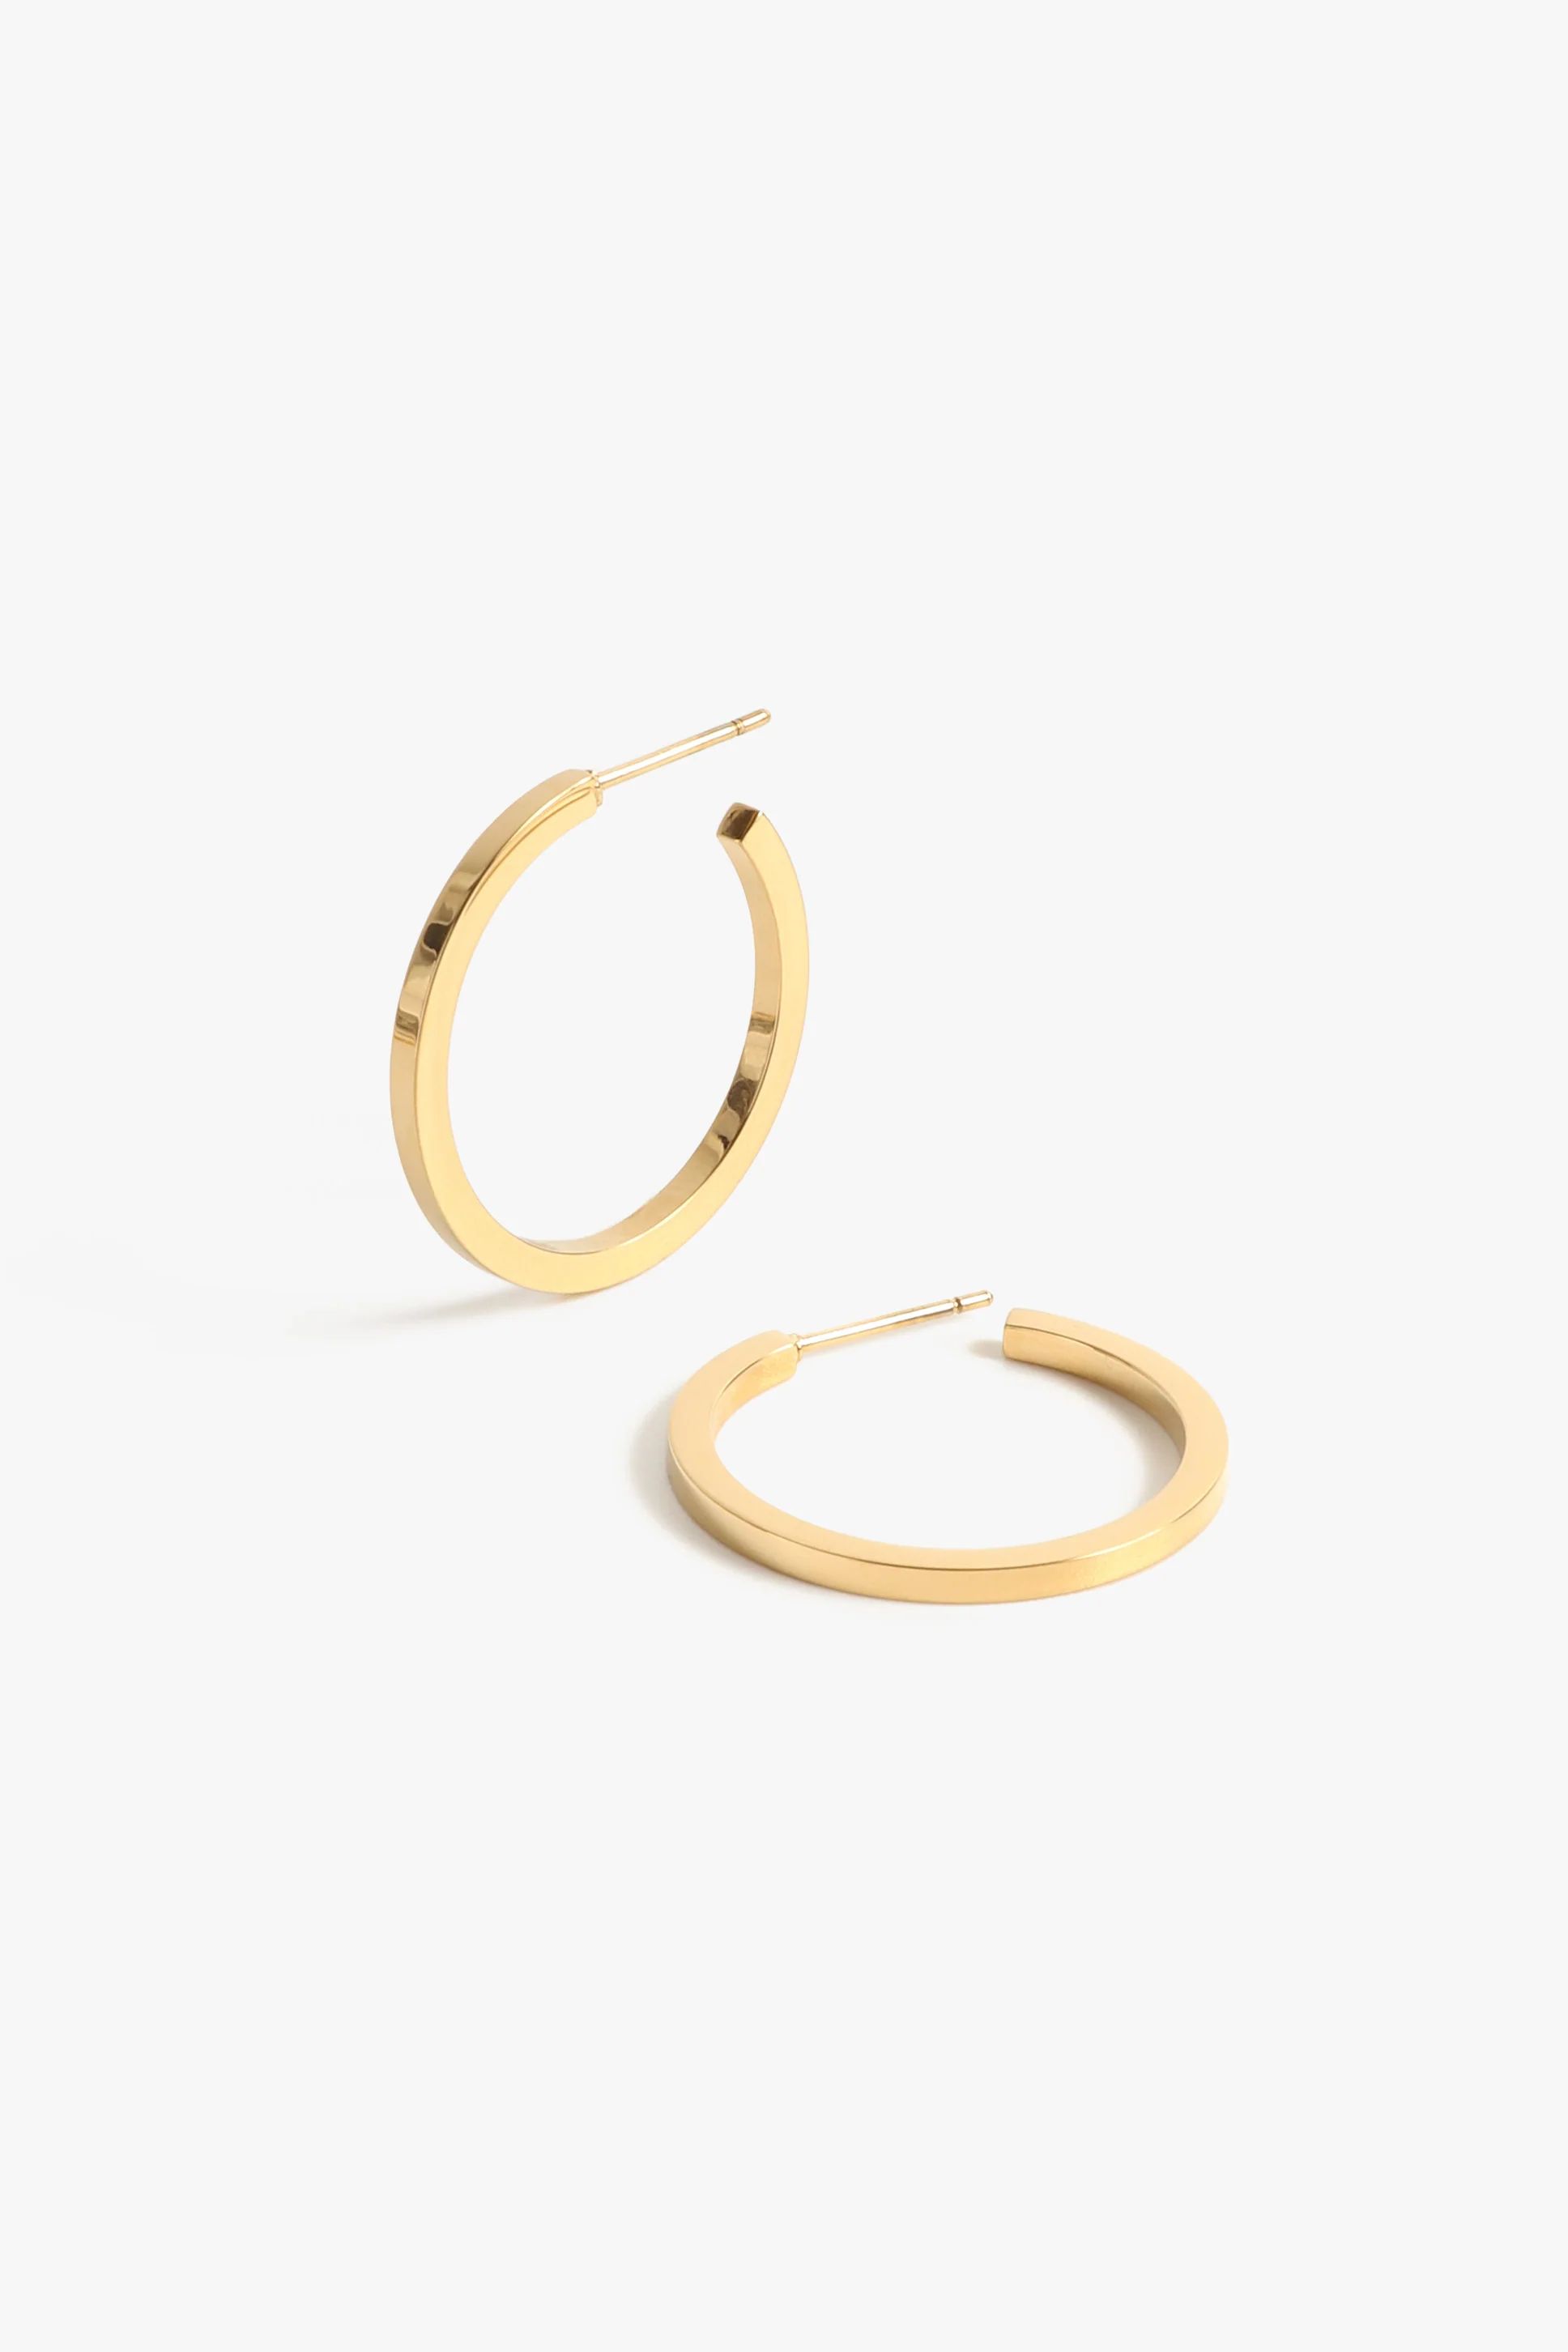 JAY HOOPS 1" - preorder | Marrin Costello